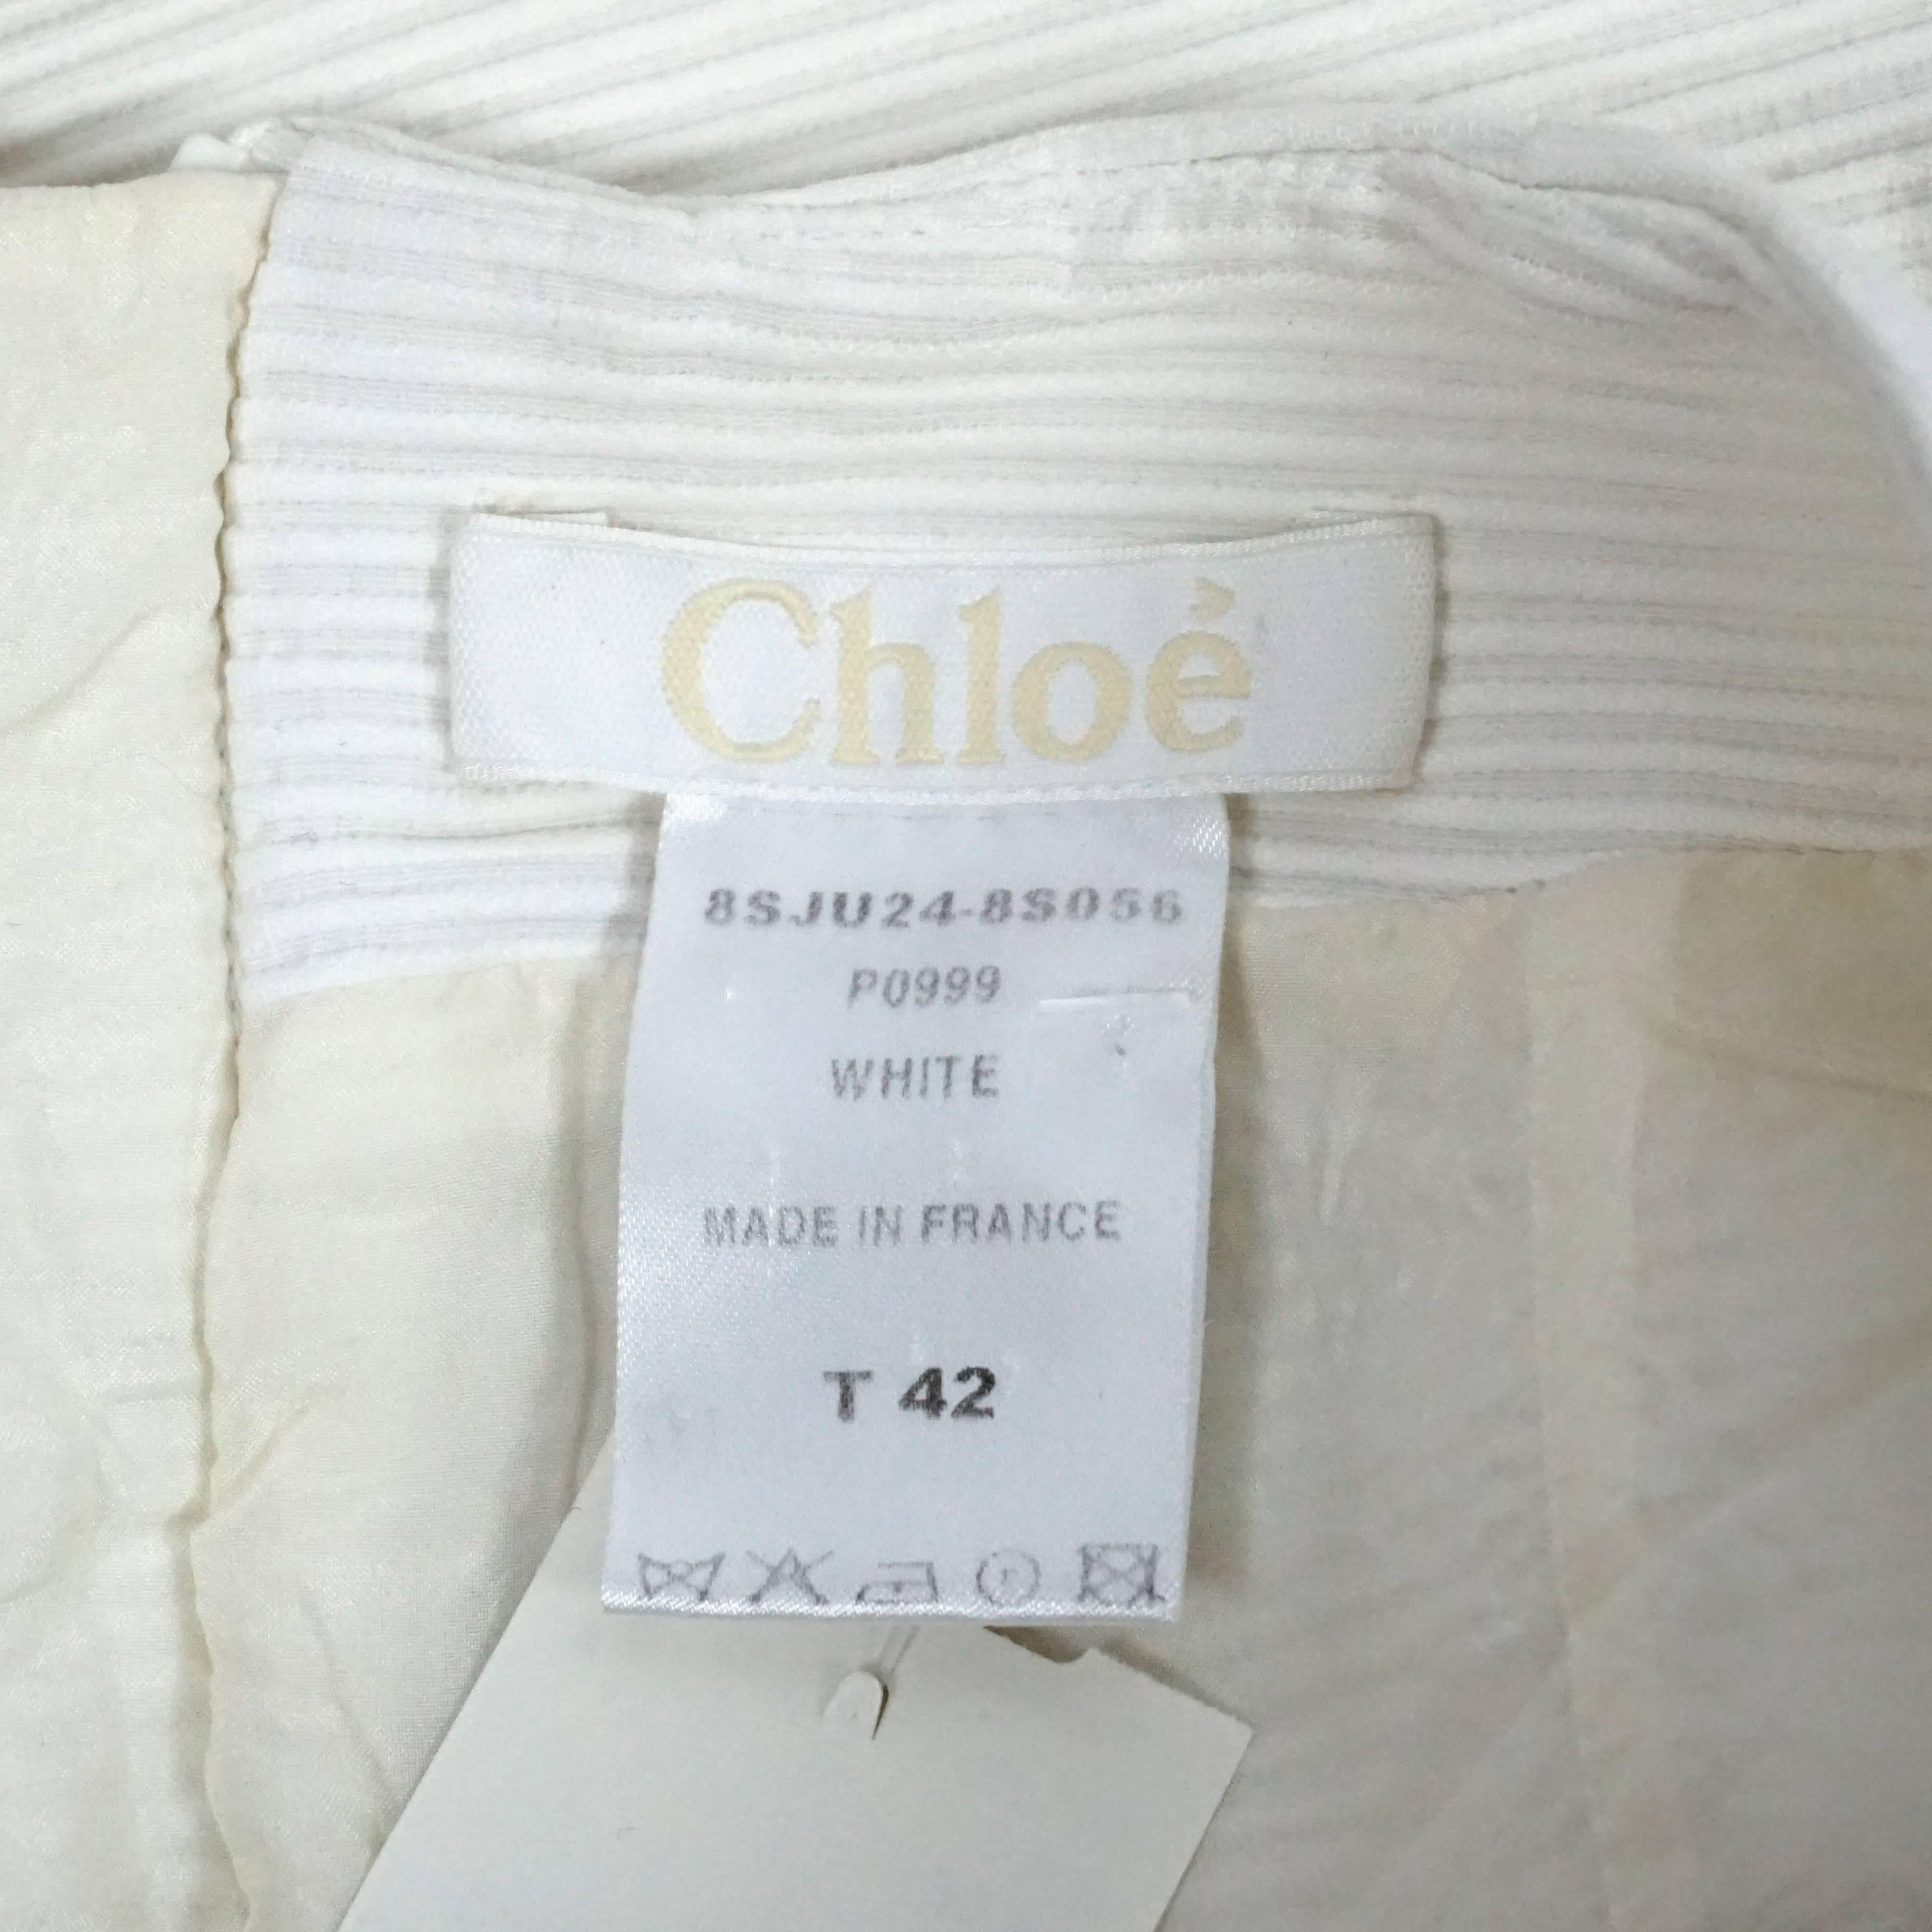 Chloe White Ribbed Cotton Skirt - 42 In Fair Condition For Sale In West Palm Beach, FL